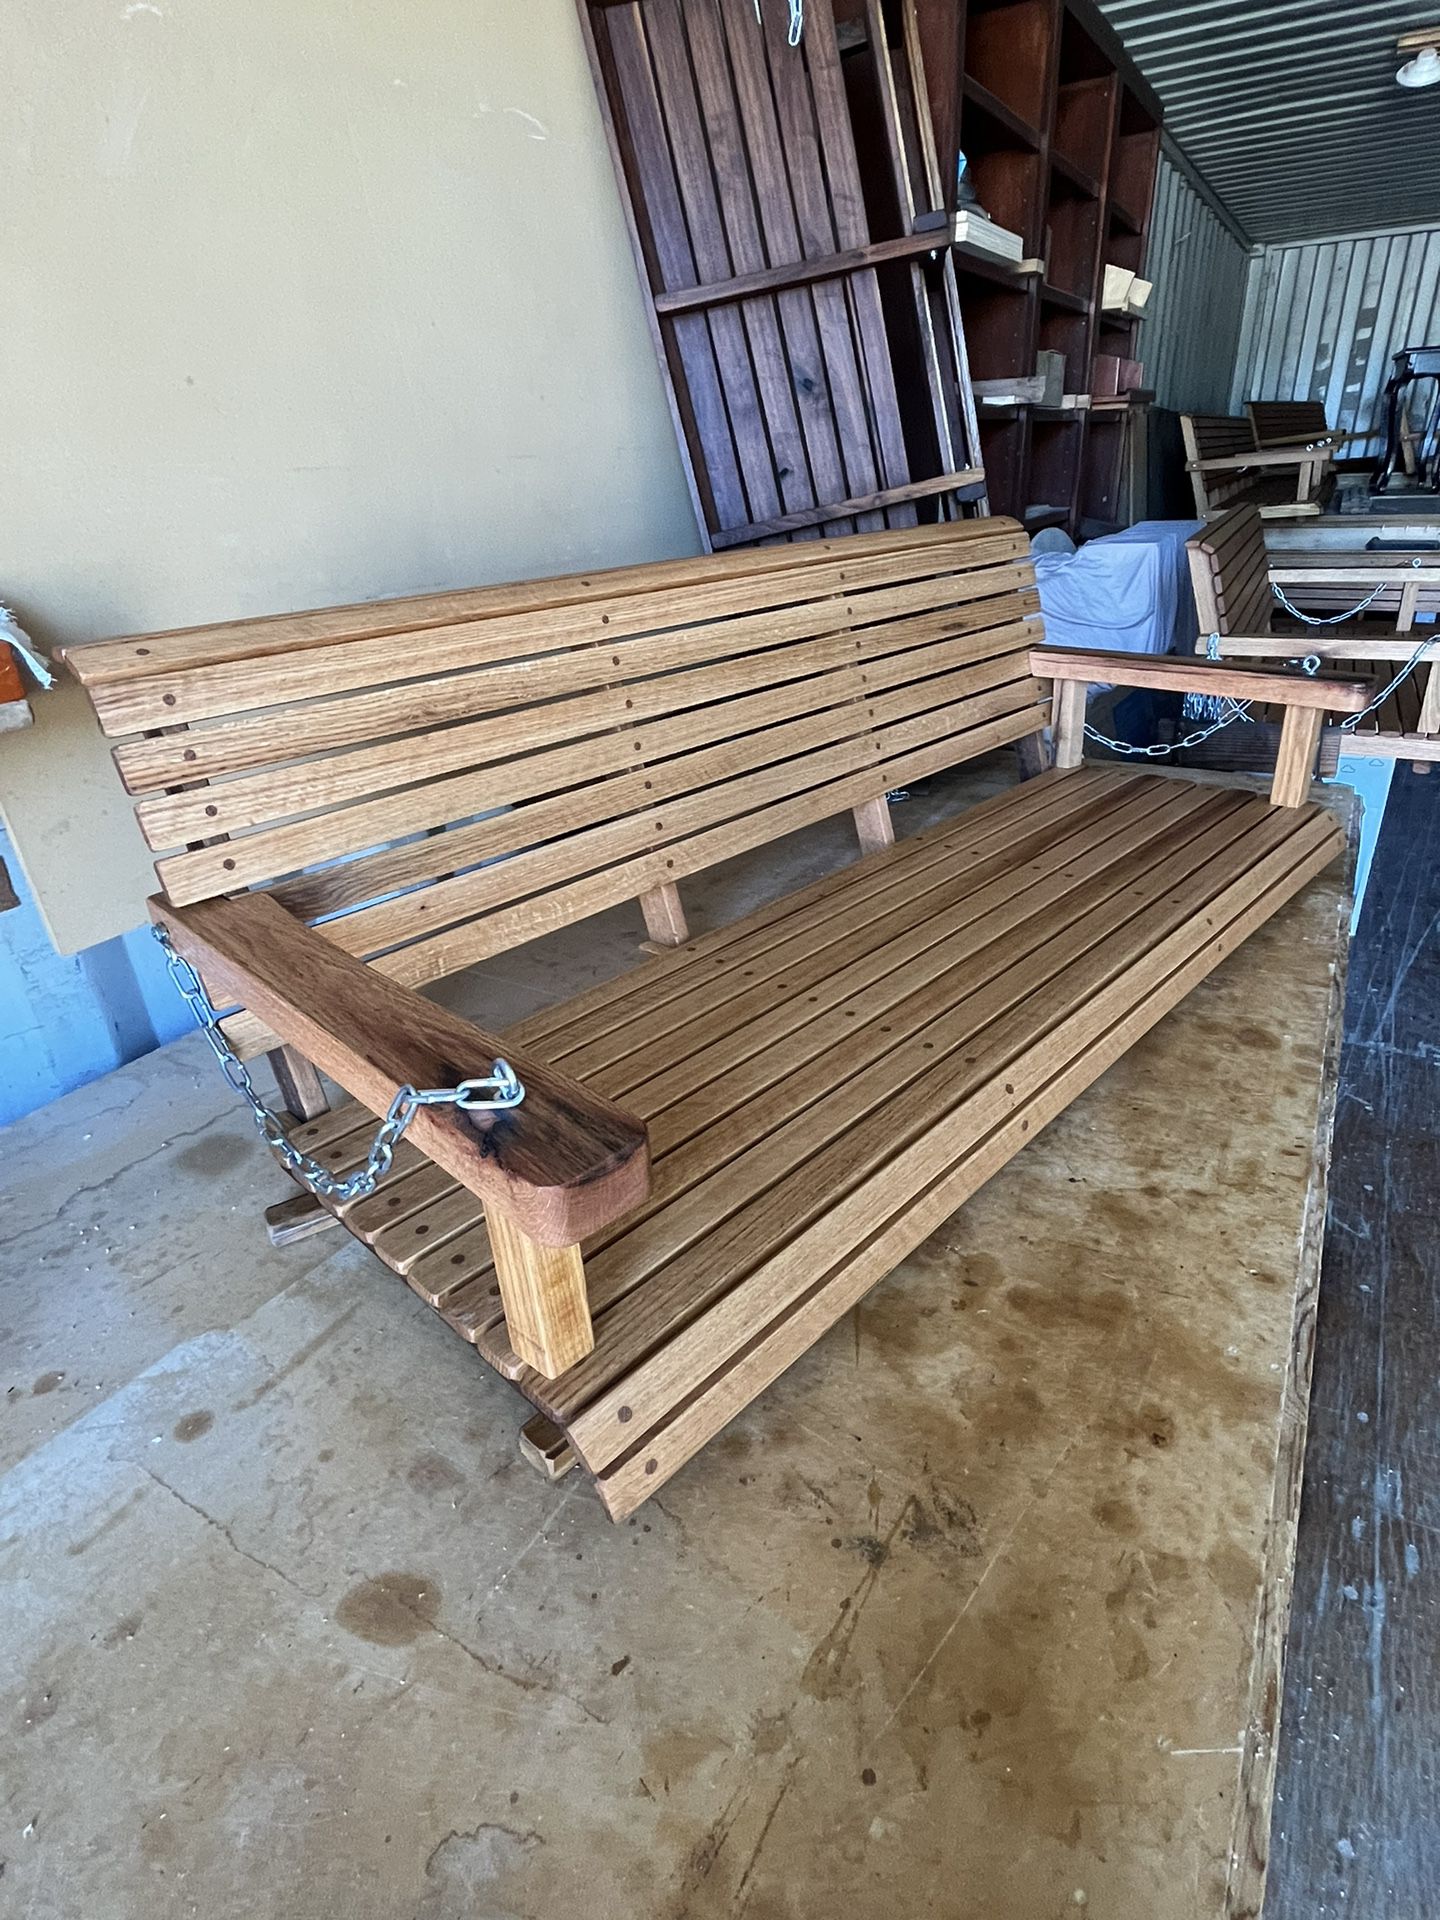 RUSTIC RED OAK PORCH SWING 60” Wide, With Chain $400